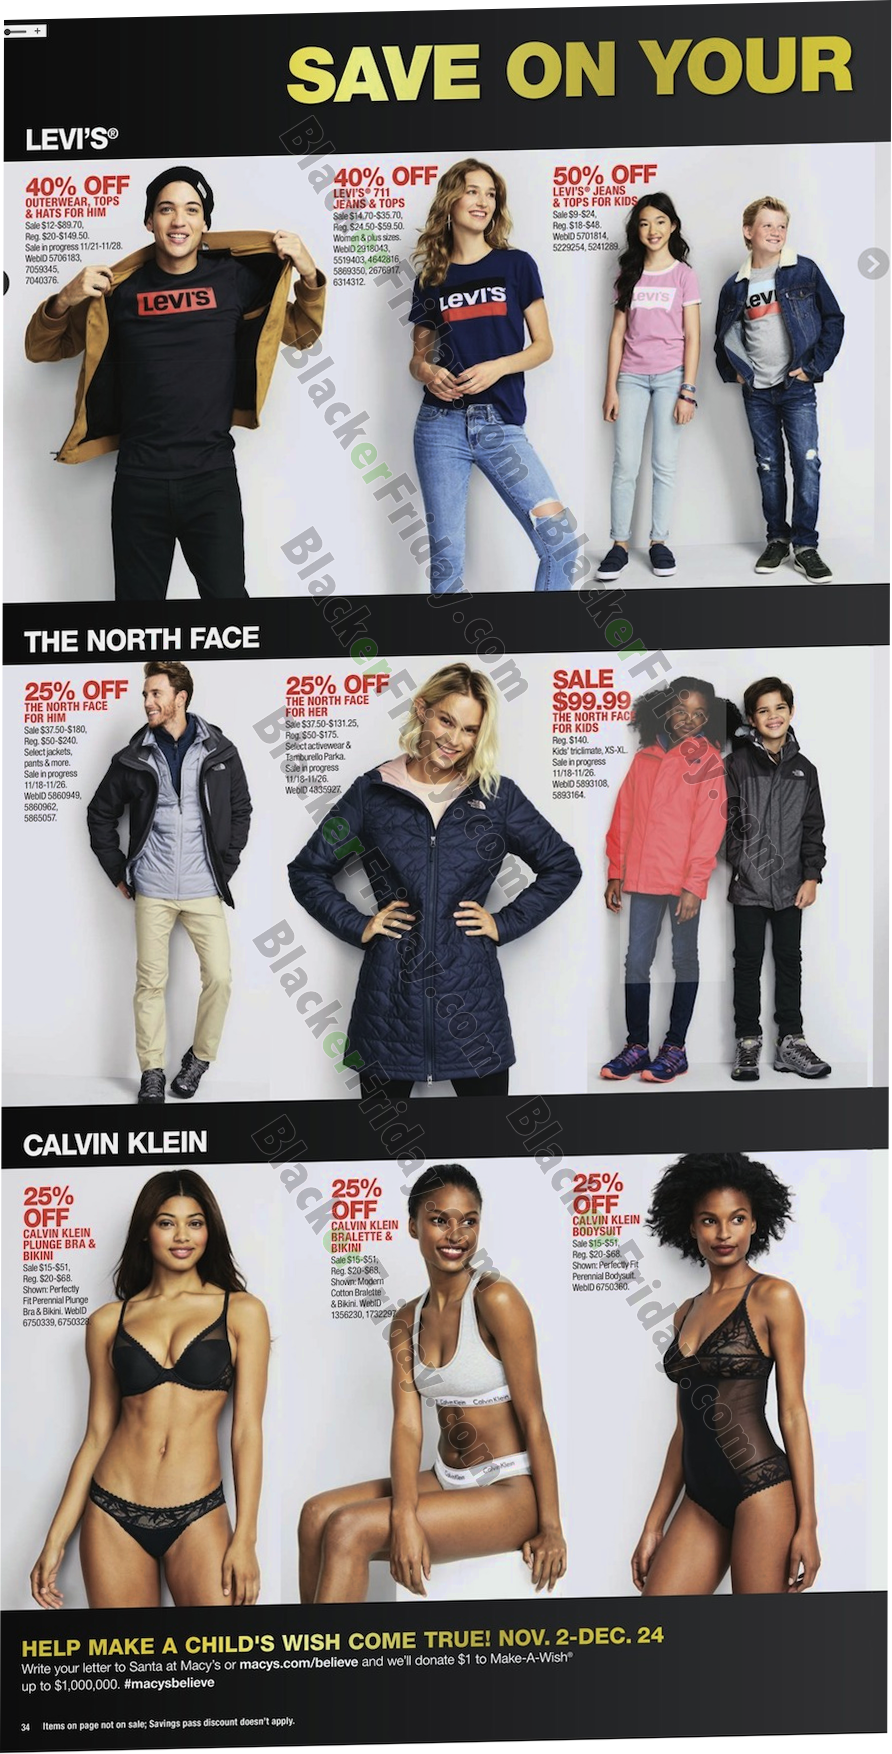 Macy&#39;s Black Friday 2019 Ad is Released! See What&#39;s on Sale - Blacker Friday